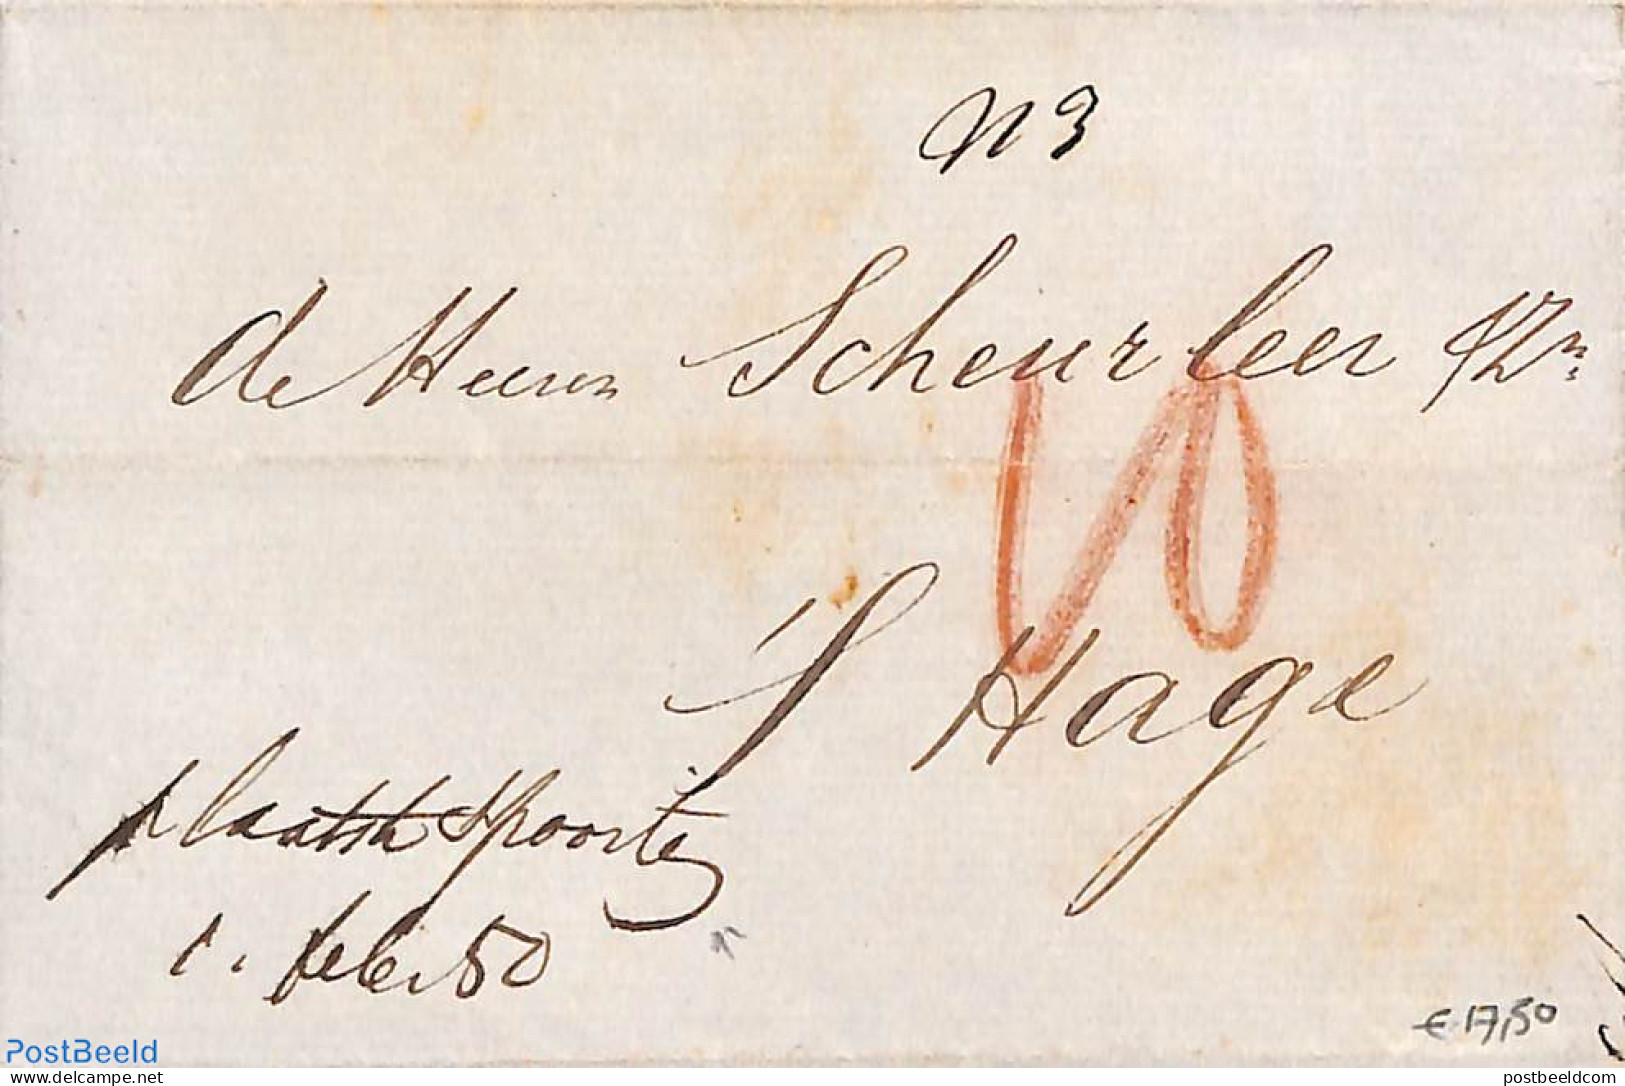 Netherlands 1880 Folding Letter From Amsterdam To The Hague, Postal History - Covers & Documents